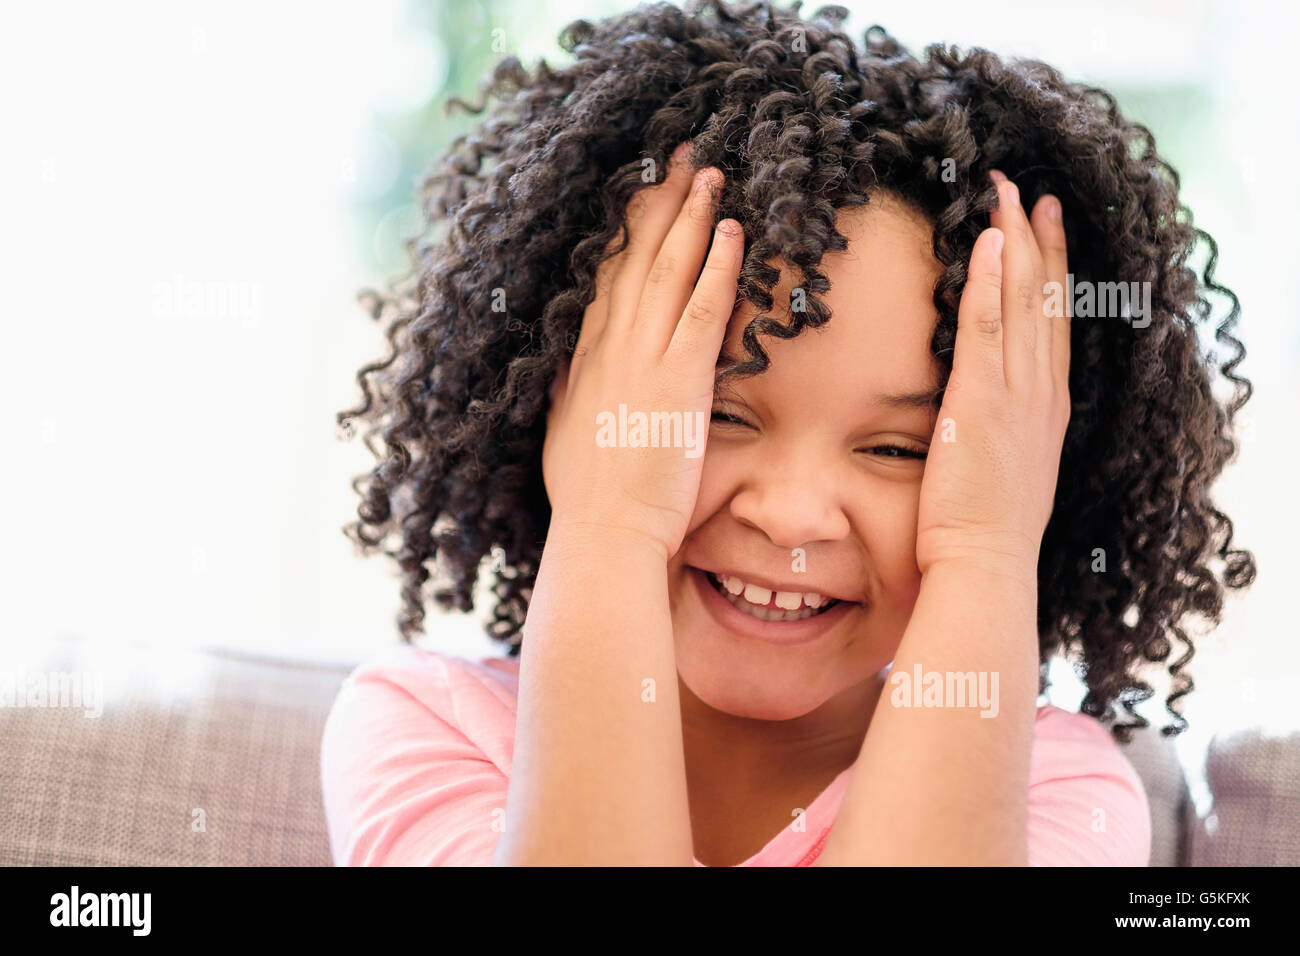 African American girl tossing her hair Stock Photo